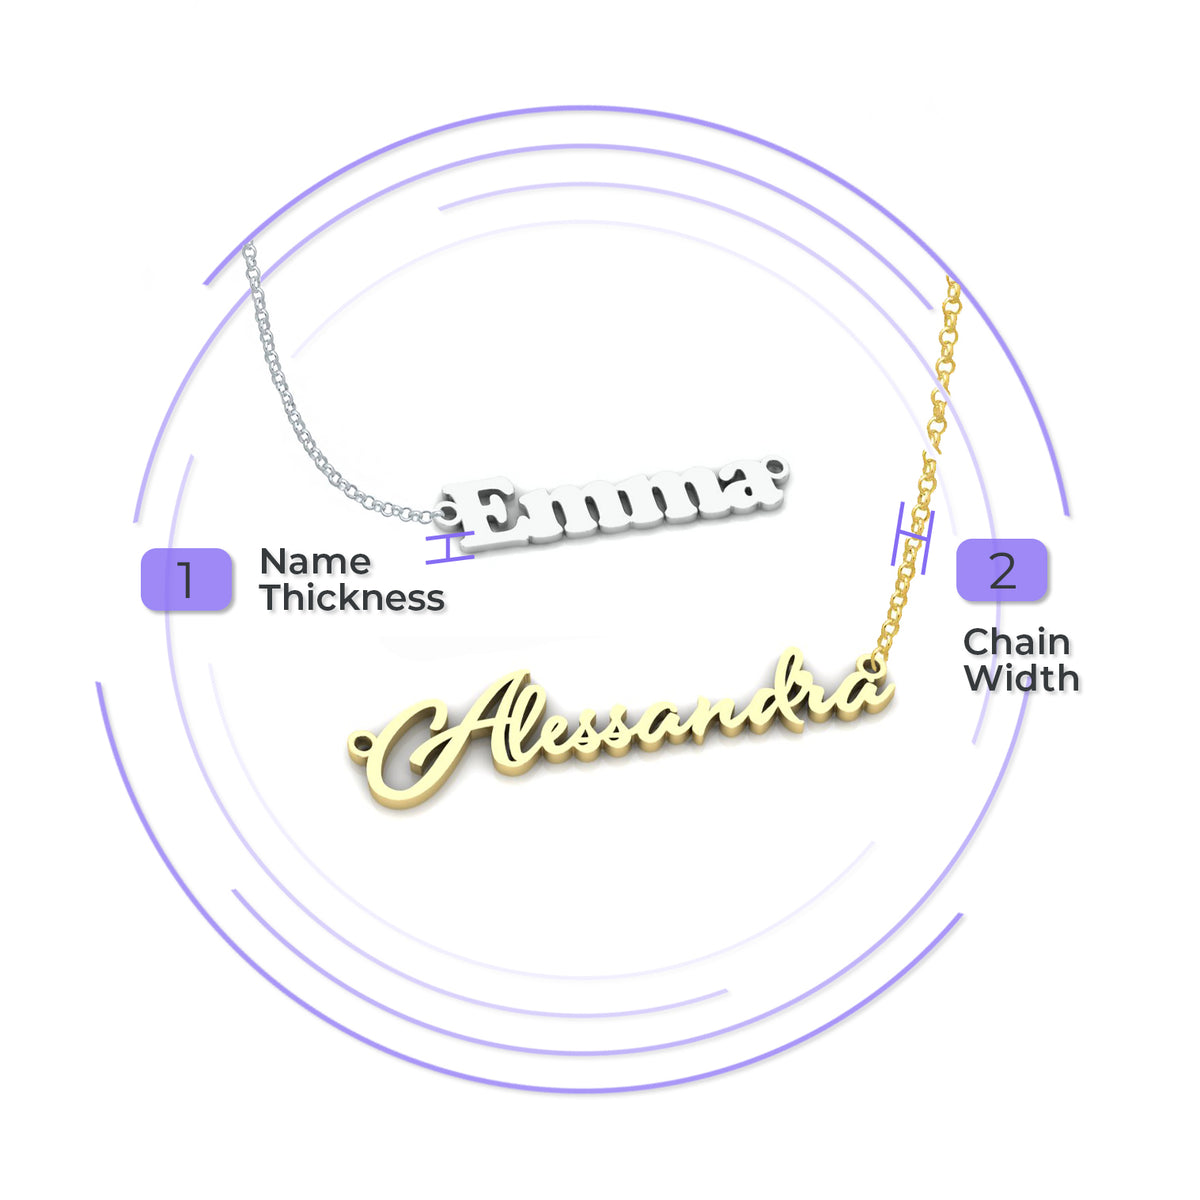 Name Necklace with measurements